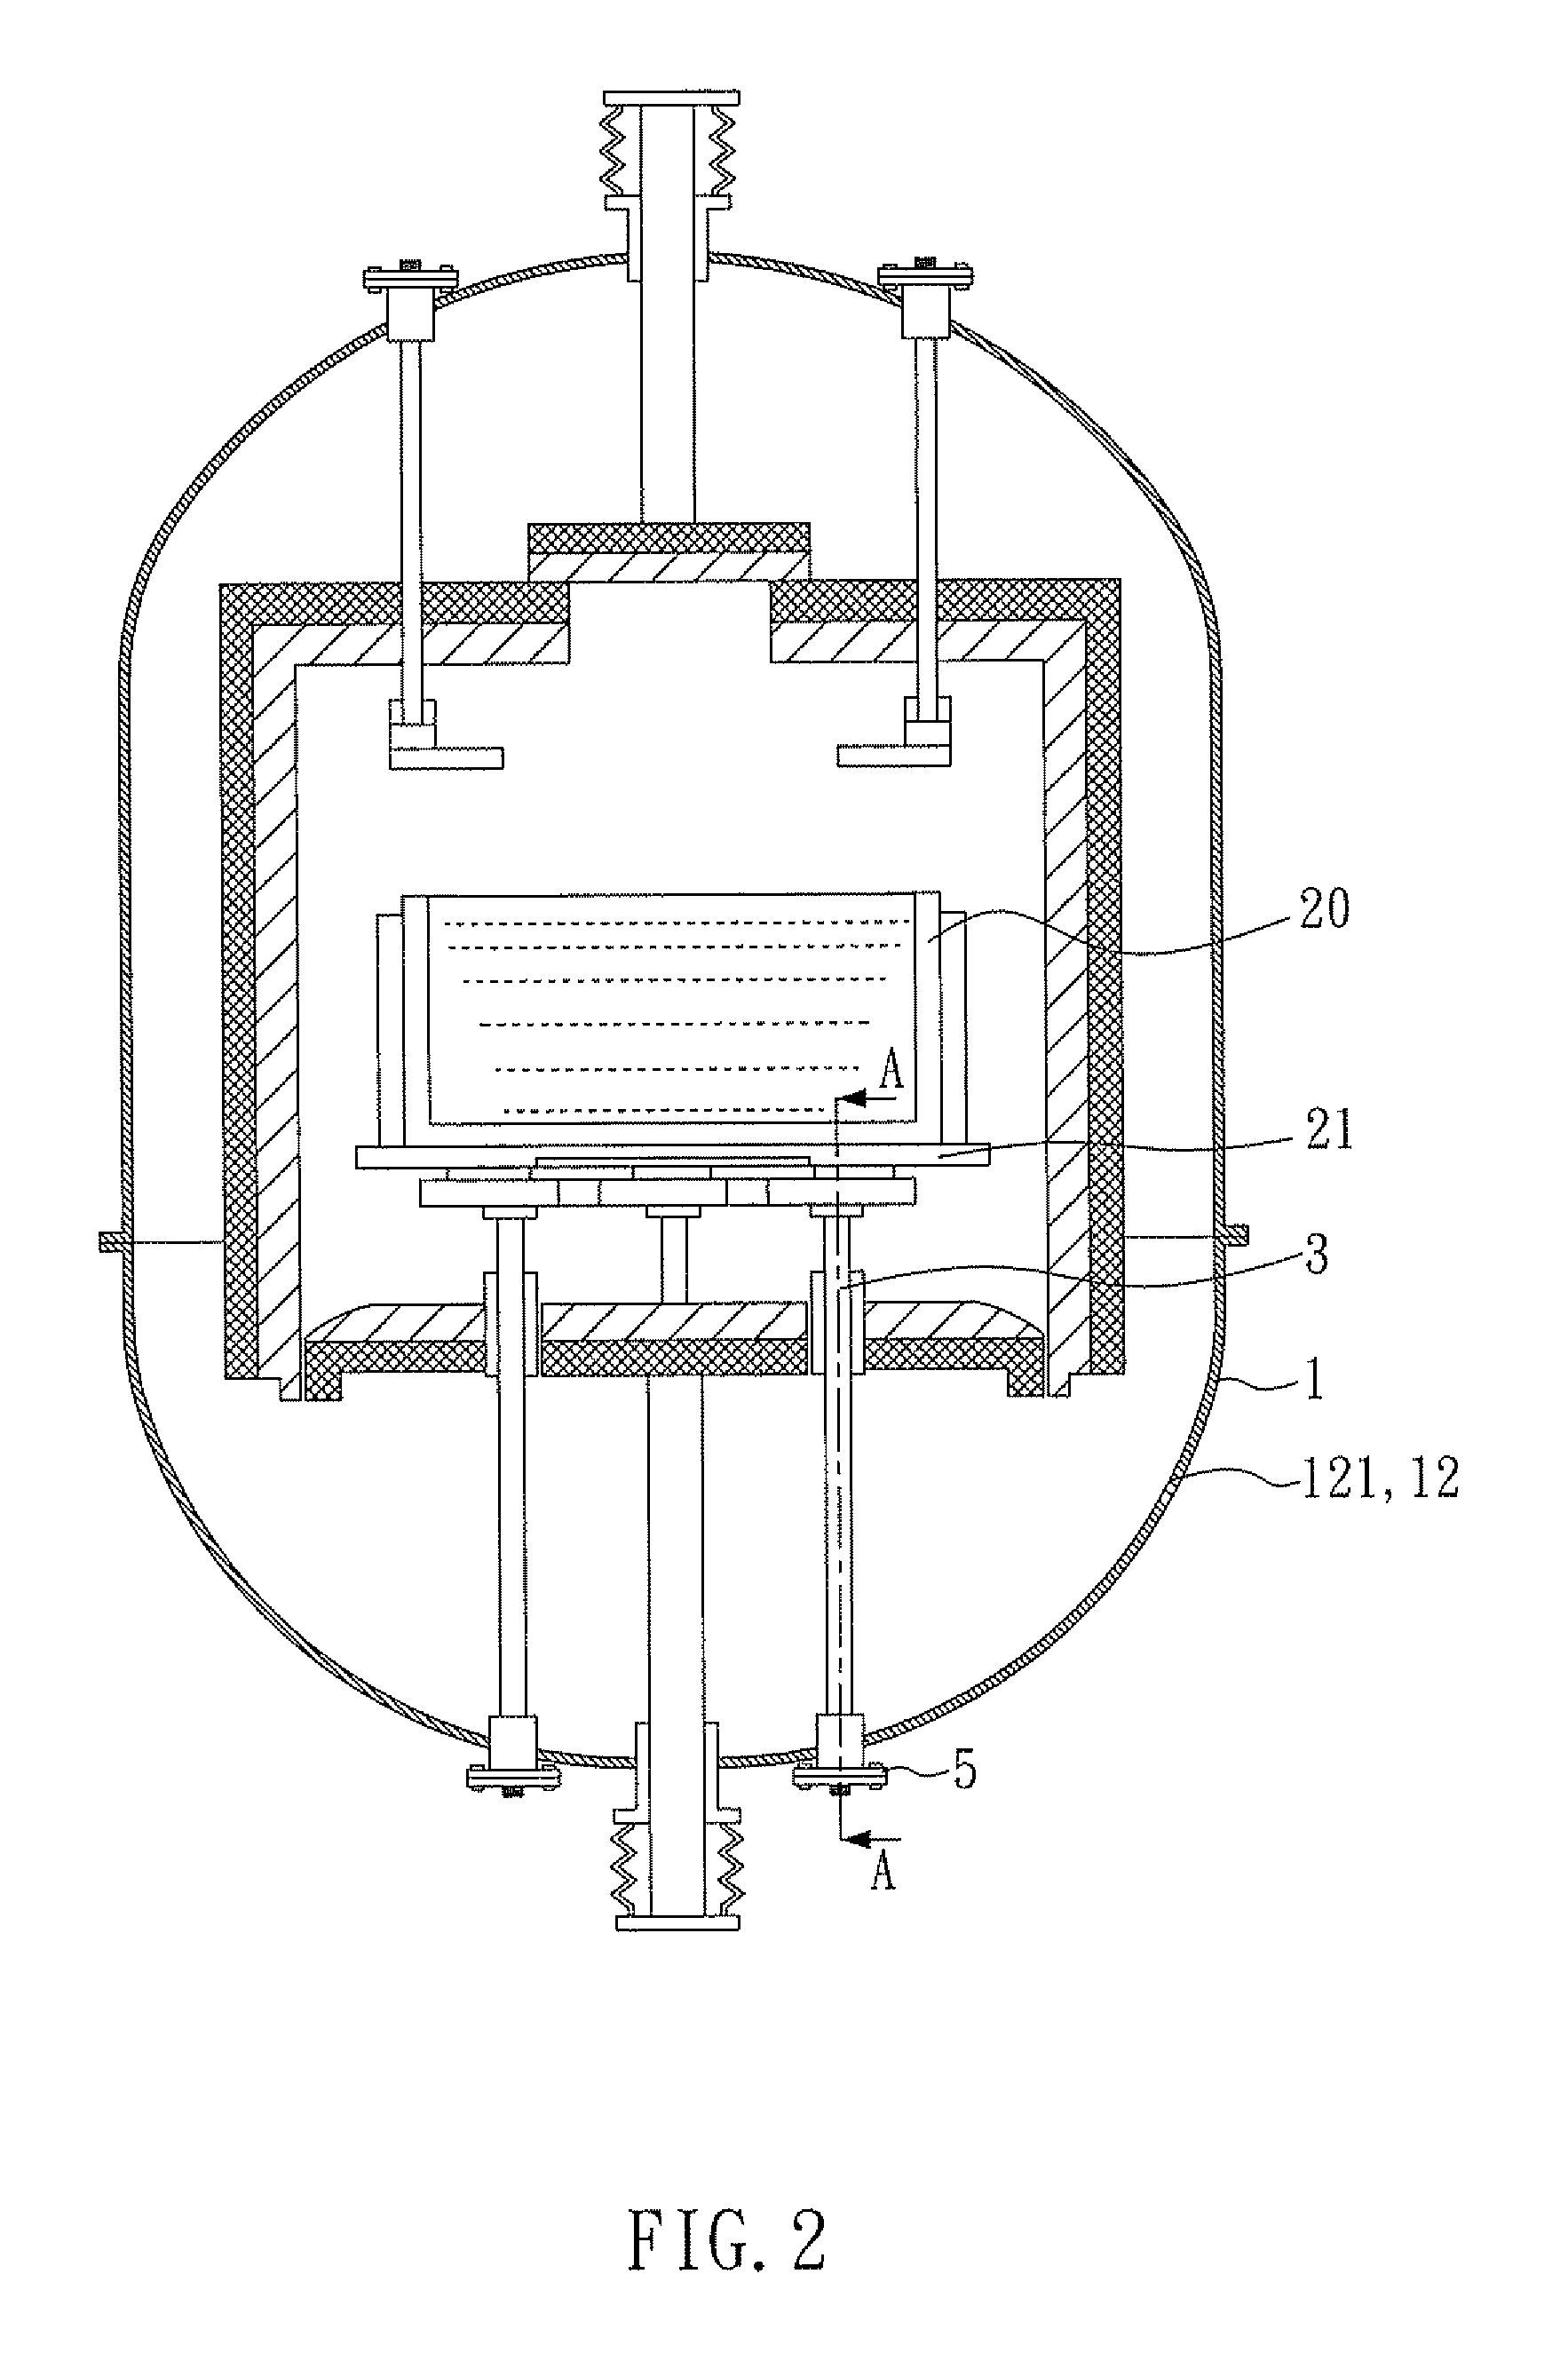 Supporting table having heaters inside crystal-growing furnace